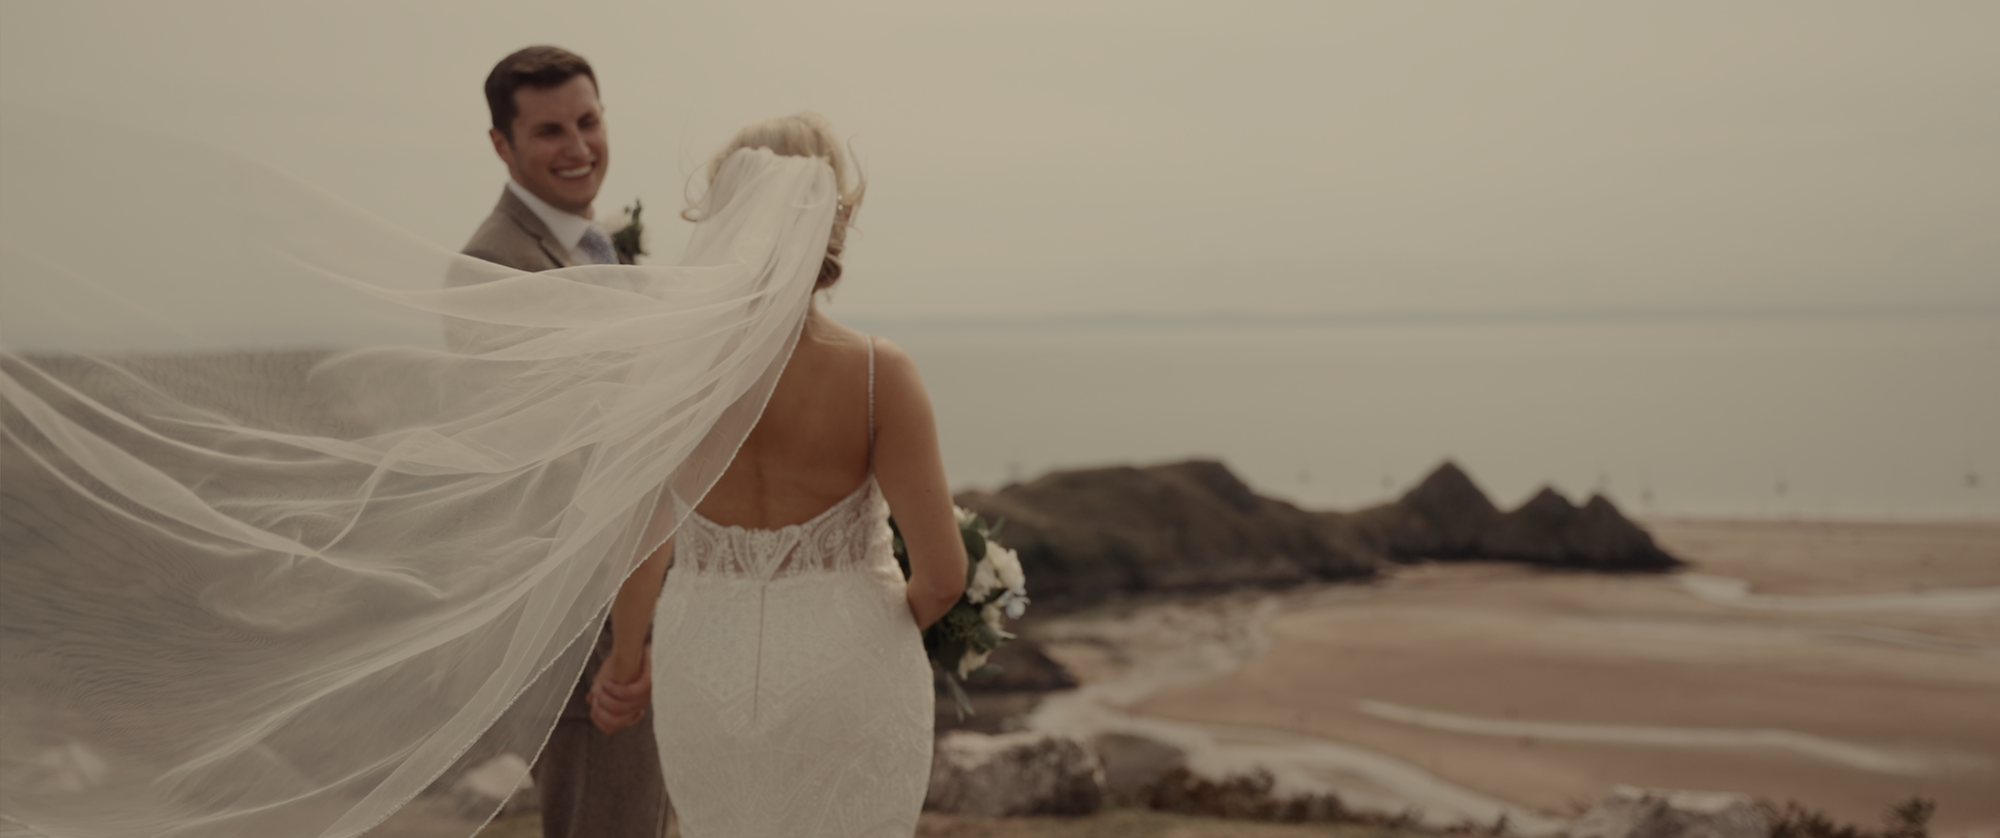 Oxwich Bay Hotel Wedding Videography by Ben Holbrook Films (Swansea South Wales).jpeg20.png